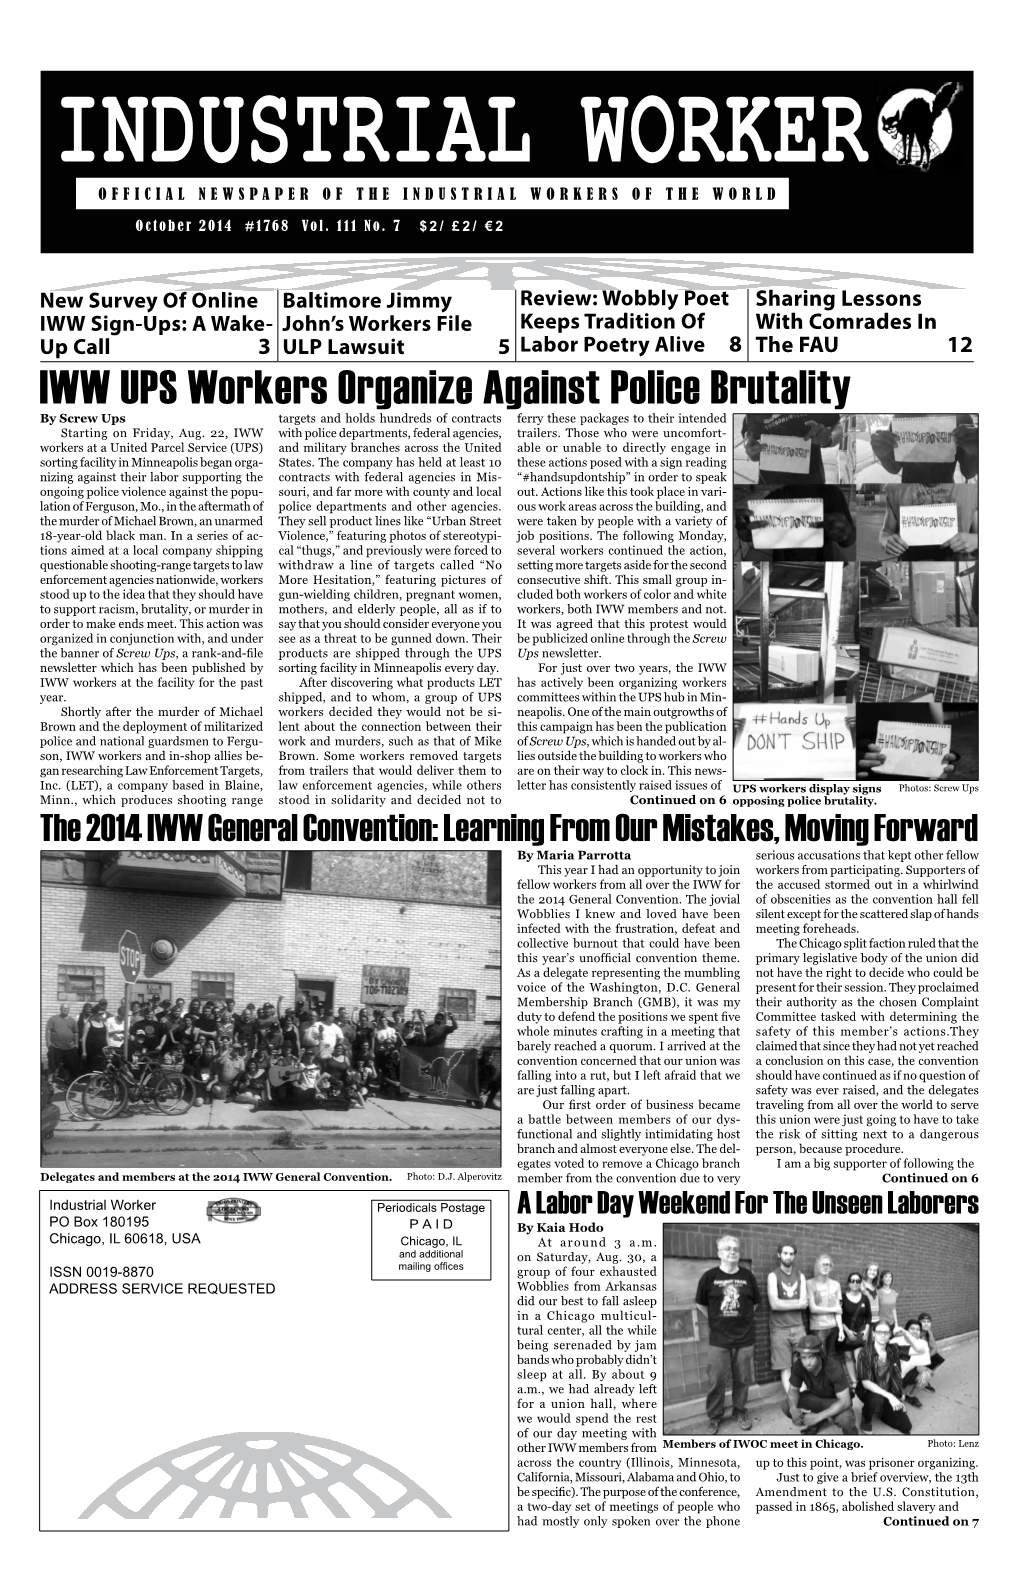 IWW UPS Workers Organize Against Police Brutality by Screw Ups Targets and Holds Hundreds of Contracts Ferry These Packages to Their Intended Starting on Friday, Aug